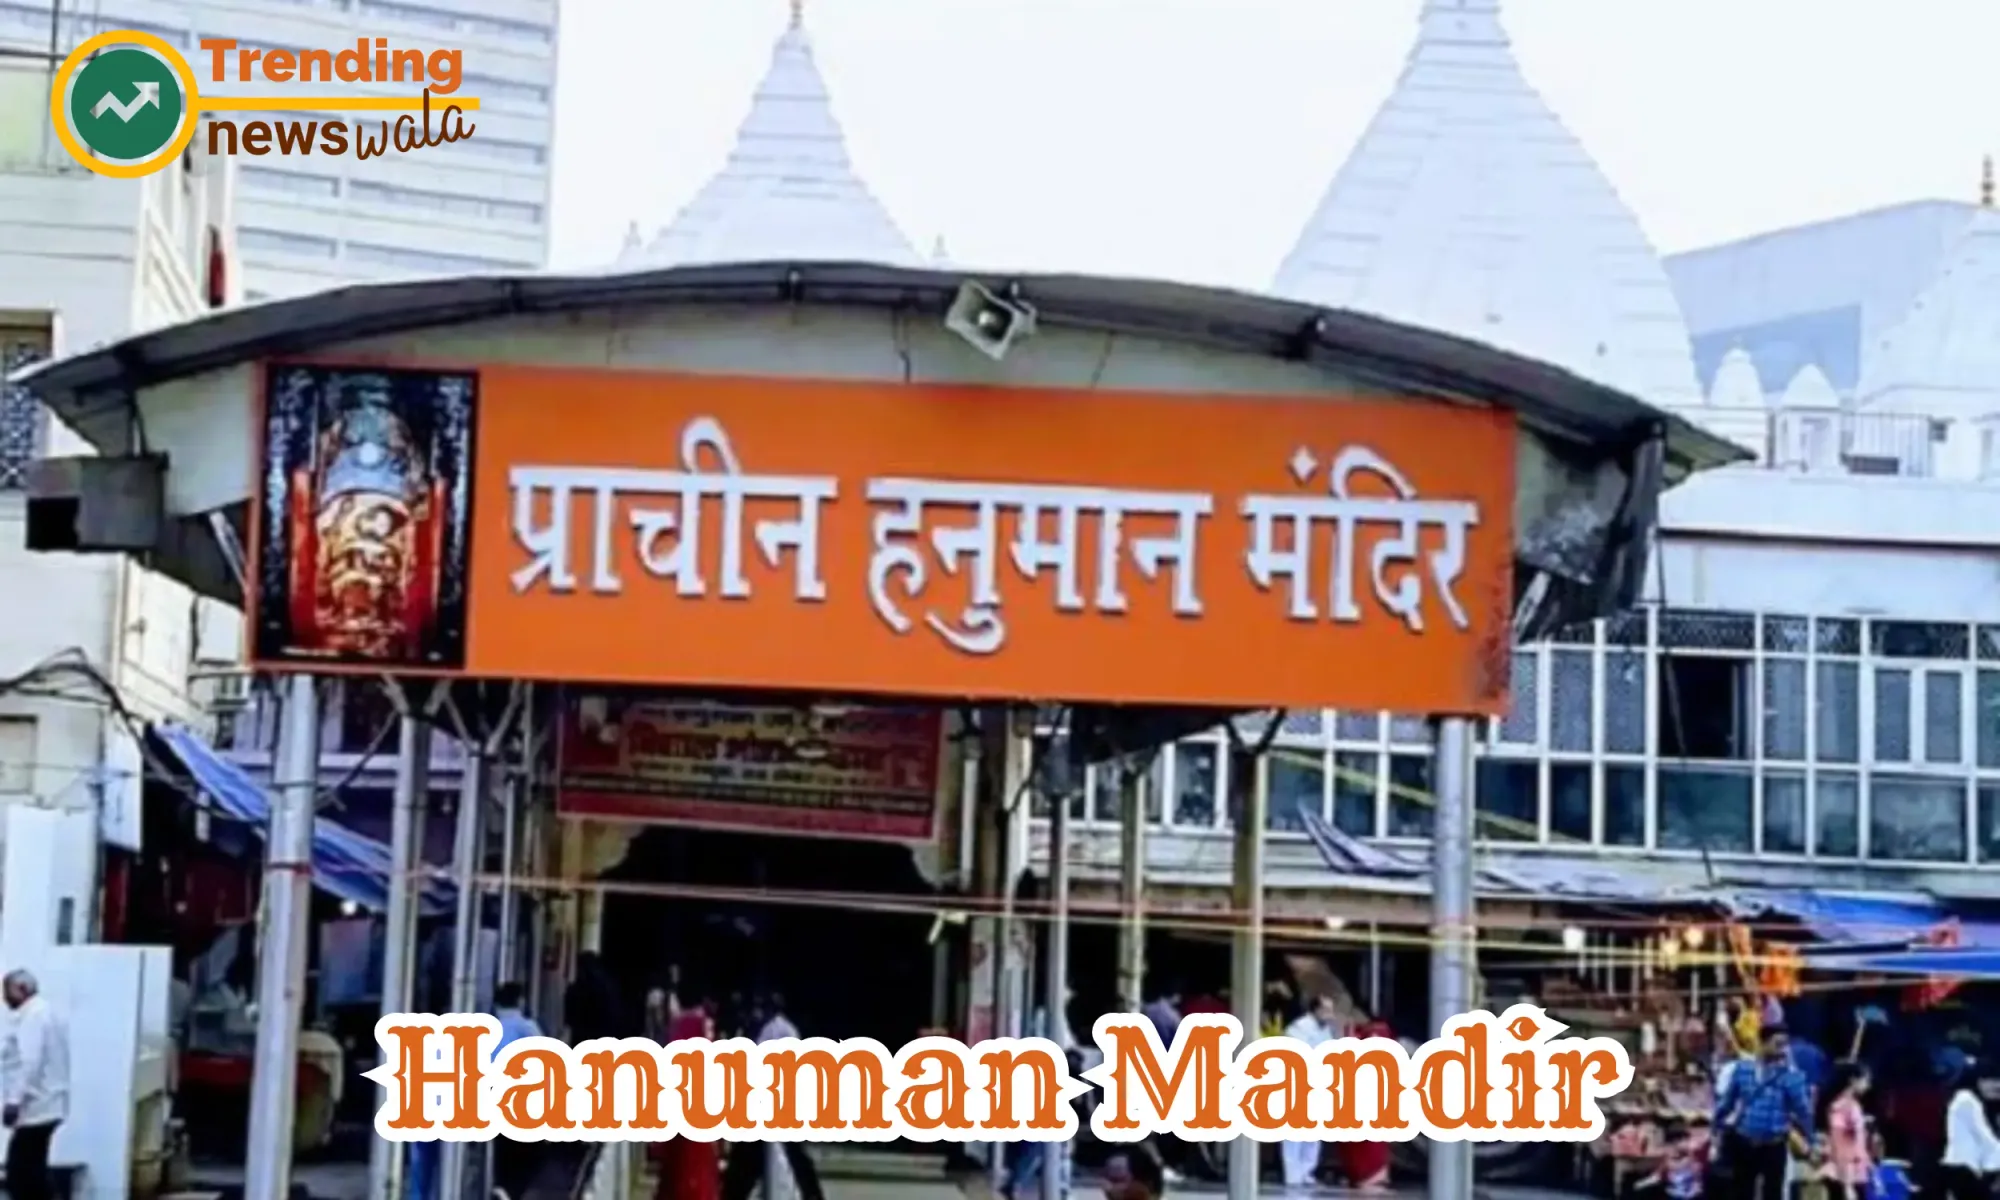 The Hanuman Mandir in Connaught Place, New Delhi is an ancient Hindu temple with a rich historical legacy.